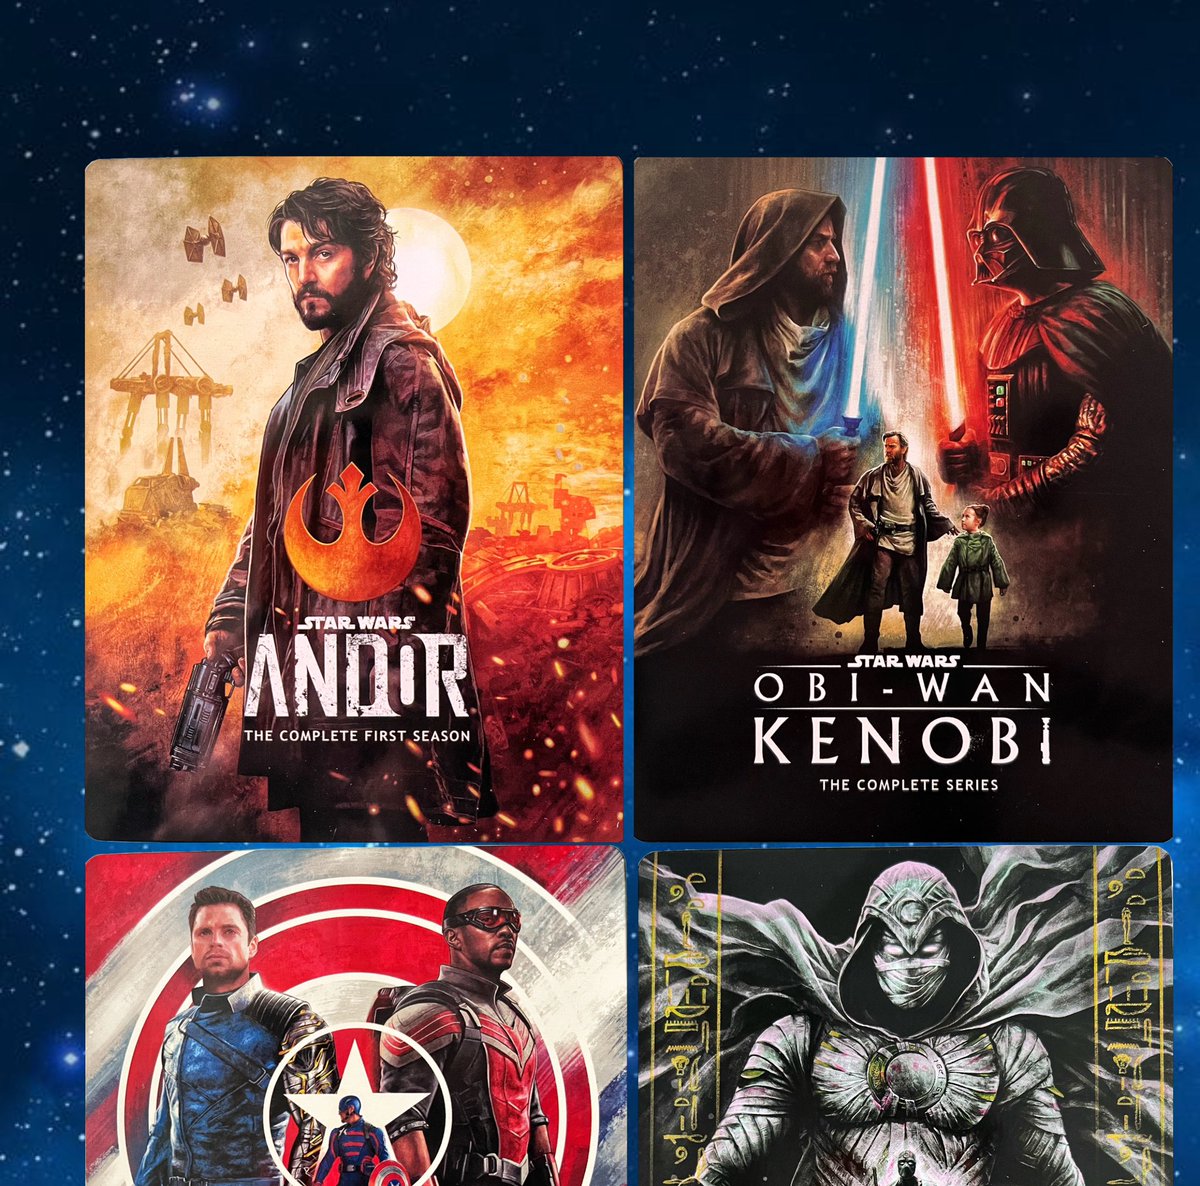 Disney+Star Wars+Marvel
4K+Steelbooks >> Doesn't get any better than that.
😍❤️👍🏻4/30 #Andor #ObiWan #TheFalconAndTheWinterSoldier #MoonKnight #4K #steelbook #moviecollection #haul #newreleases